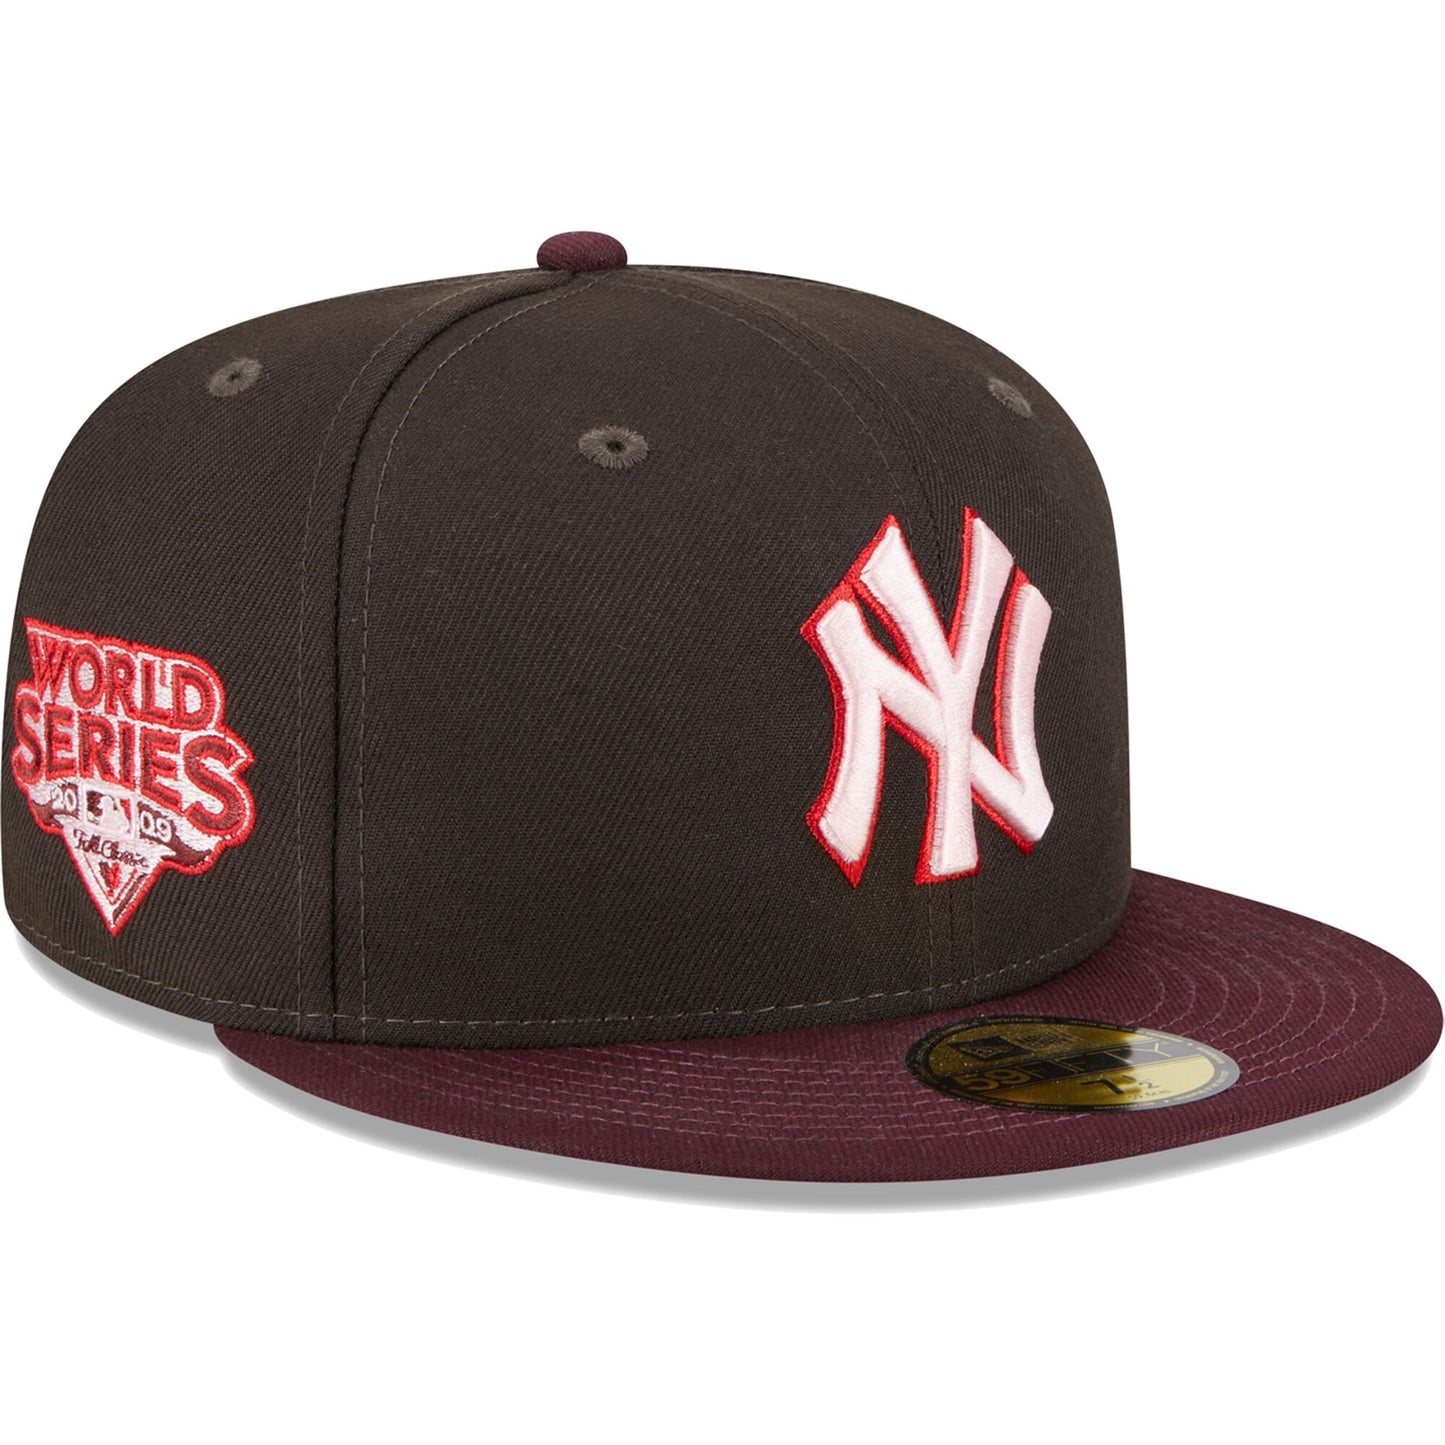 New York Yankees New Era Chocolate Strawberry 59FIFTY Fitted Hat - Brown/Maroon